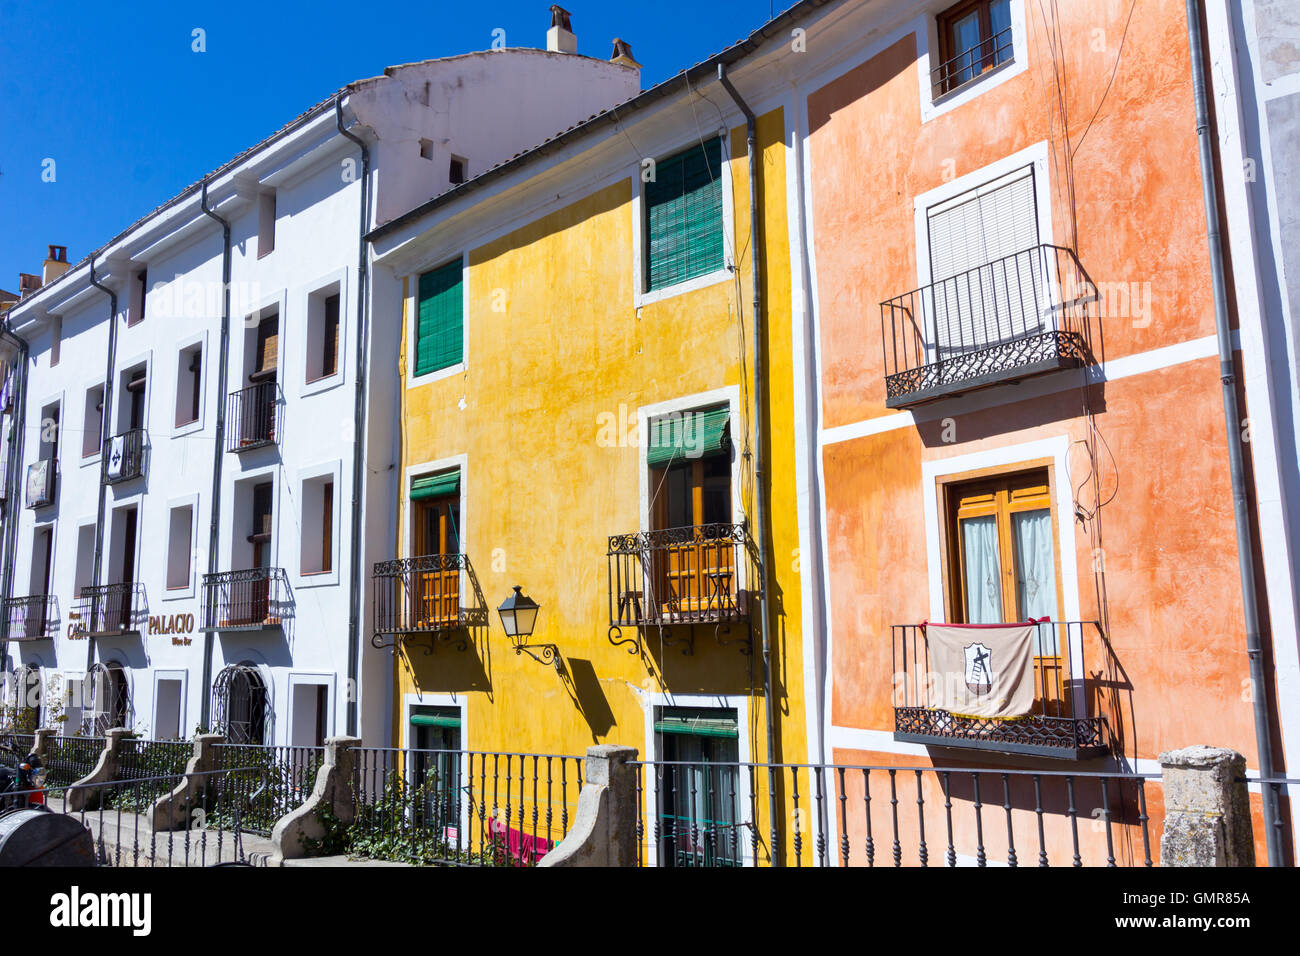 Typical colorful houses in the city of Cuenca, Spain Stock Photo